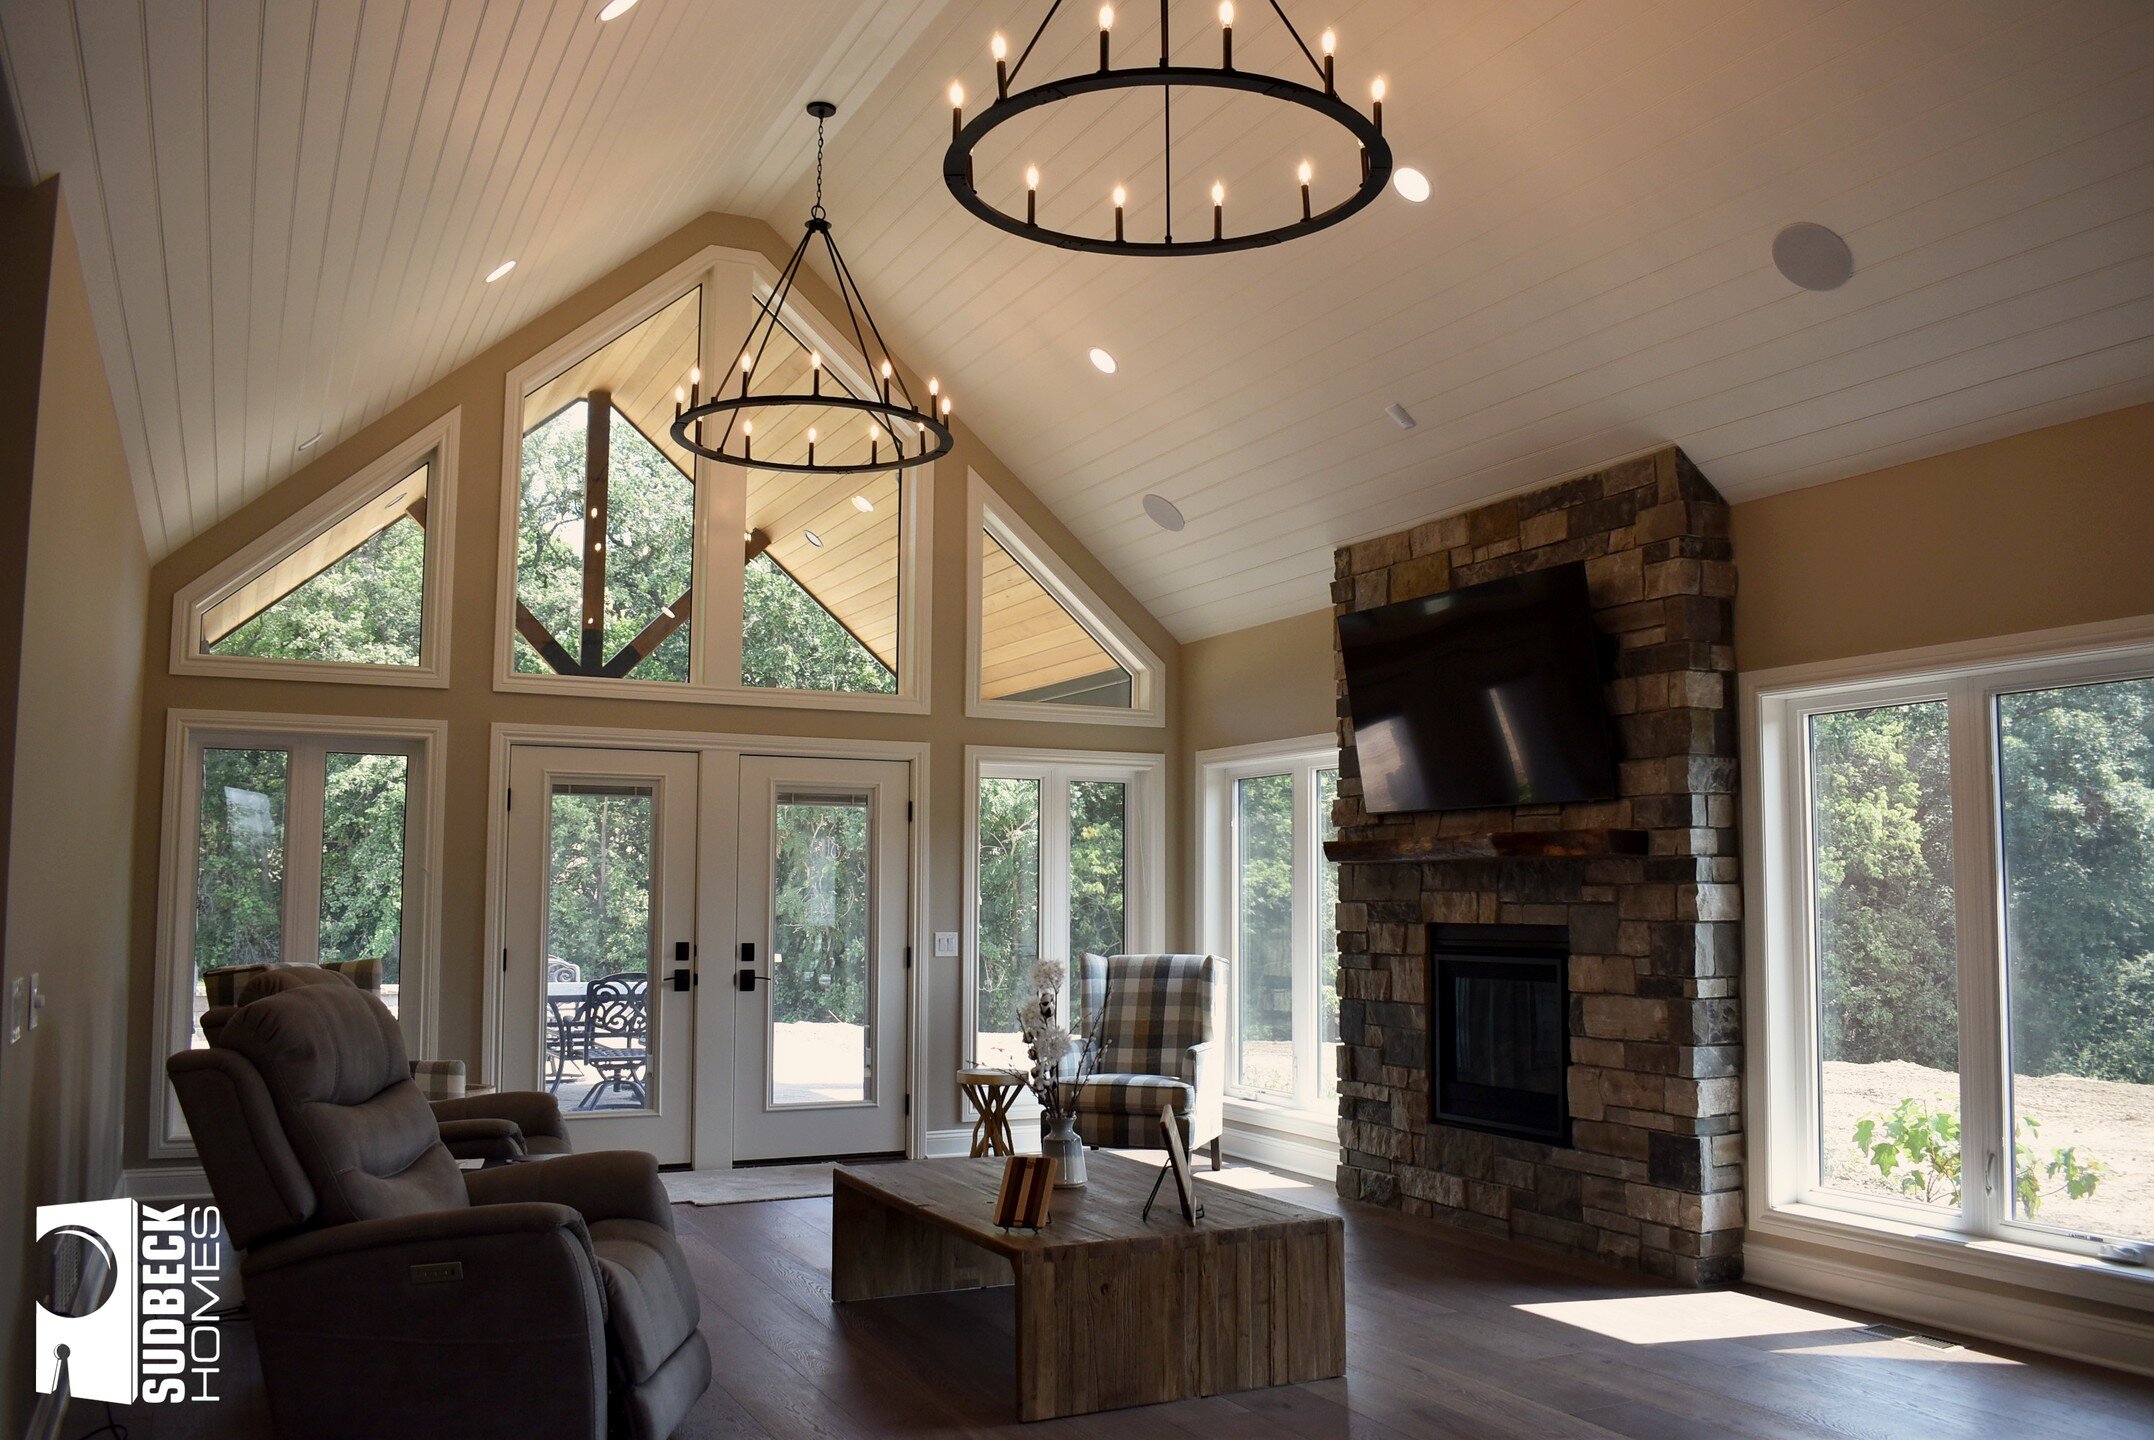 One of our favorites! This custom mountain style home is just stunning! Vaulted ceilings, incredible light fixtures, and breathtaking craftsmanship in the kitchen! This house just continuously catches your eye!

For more custom options, contact us th